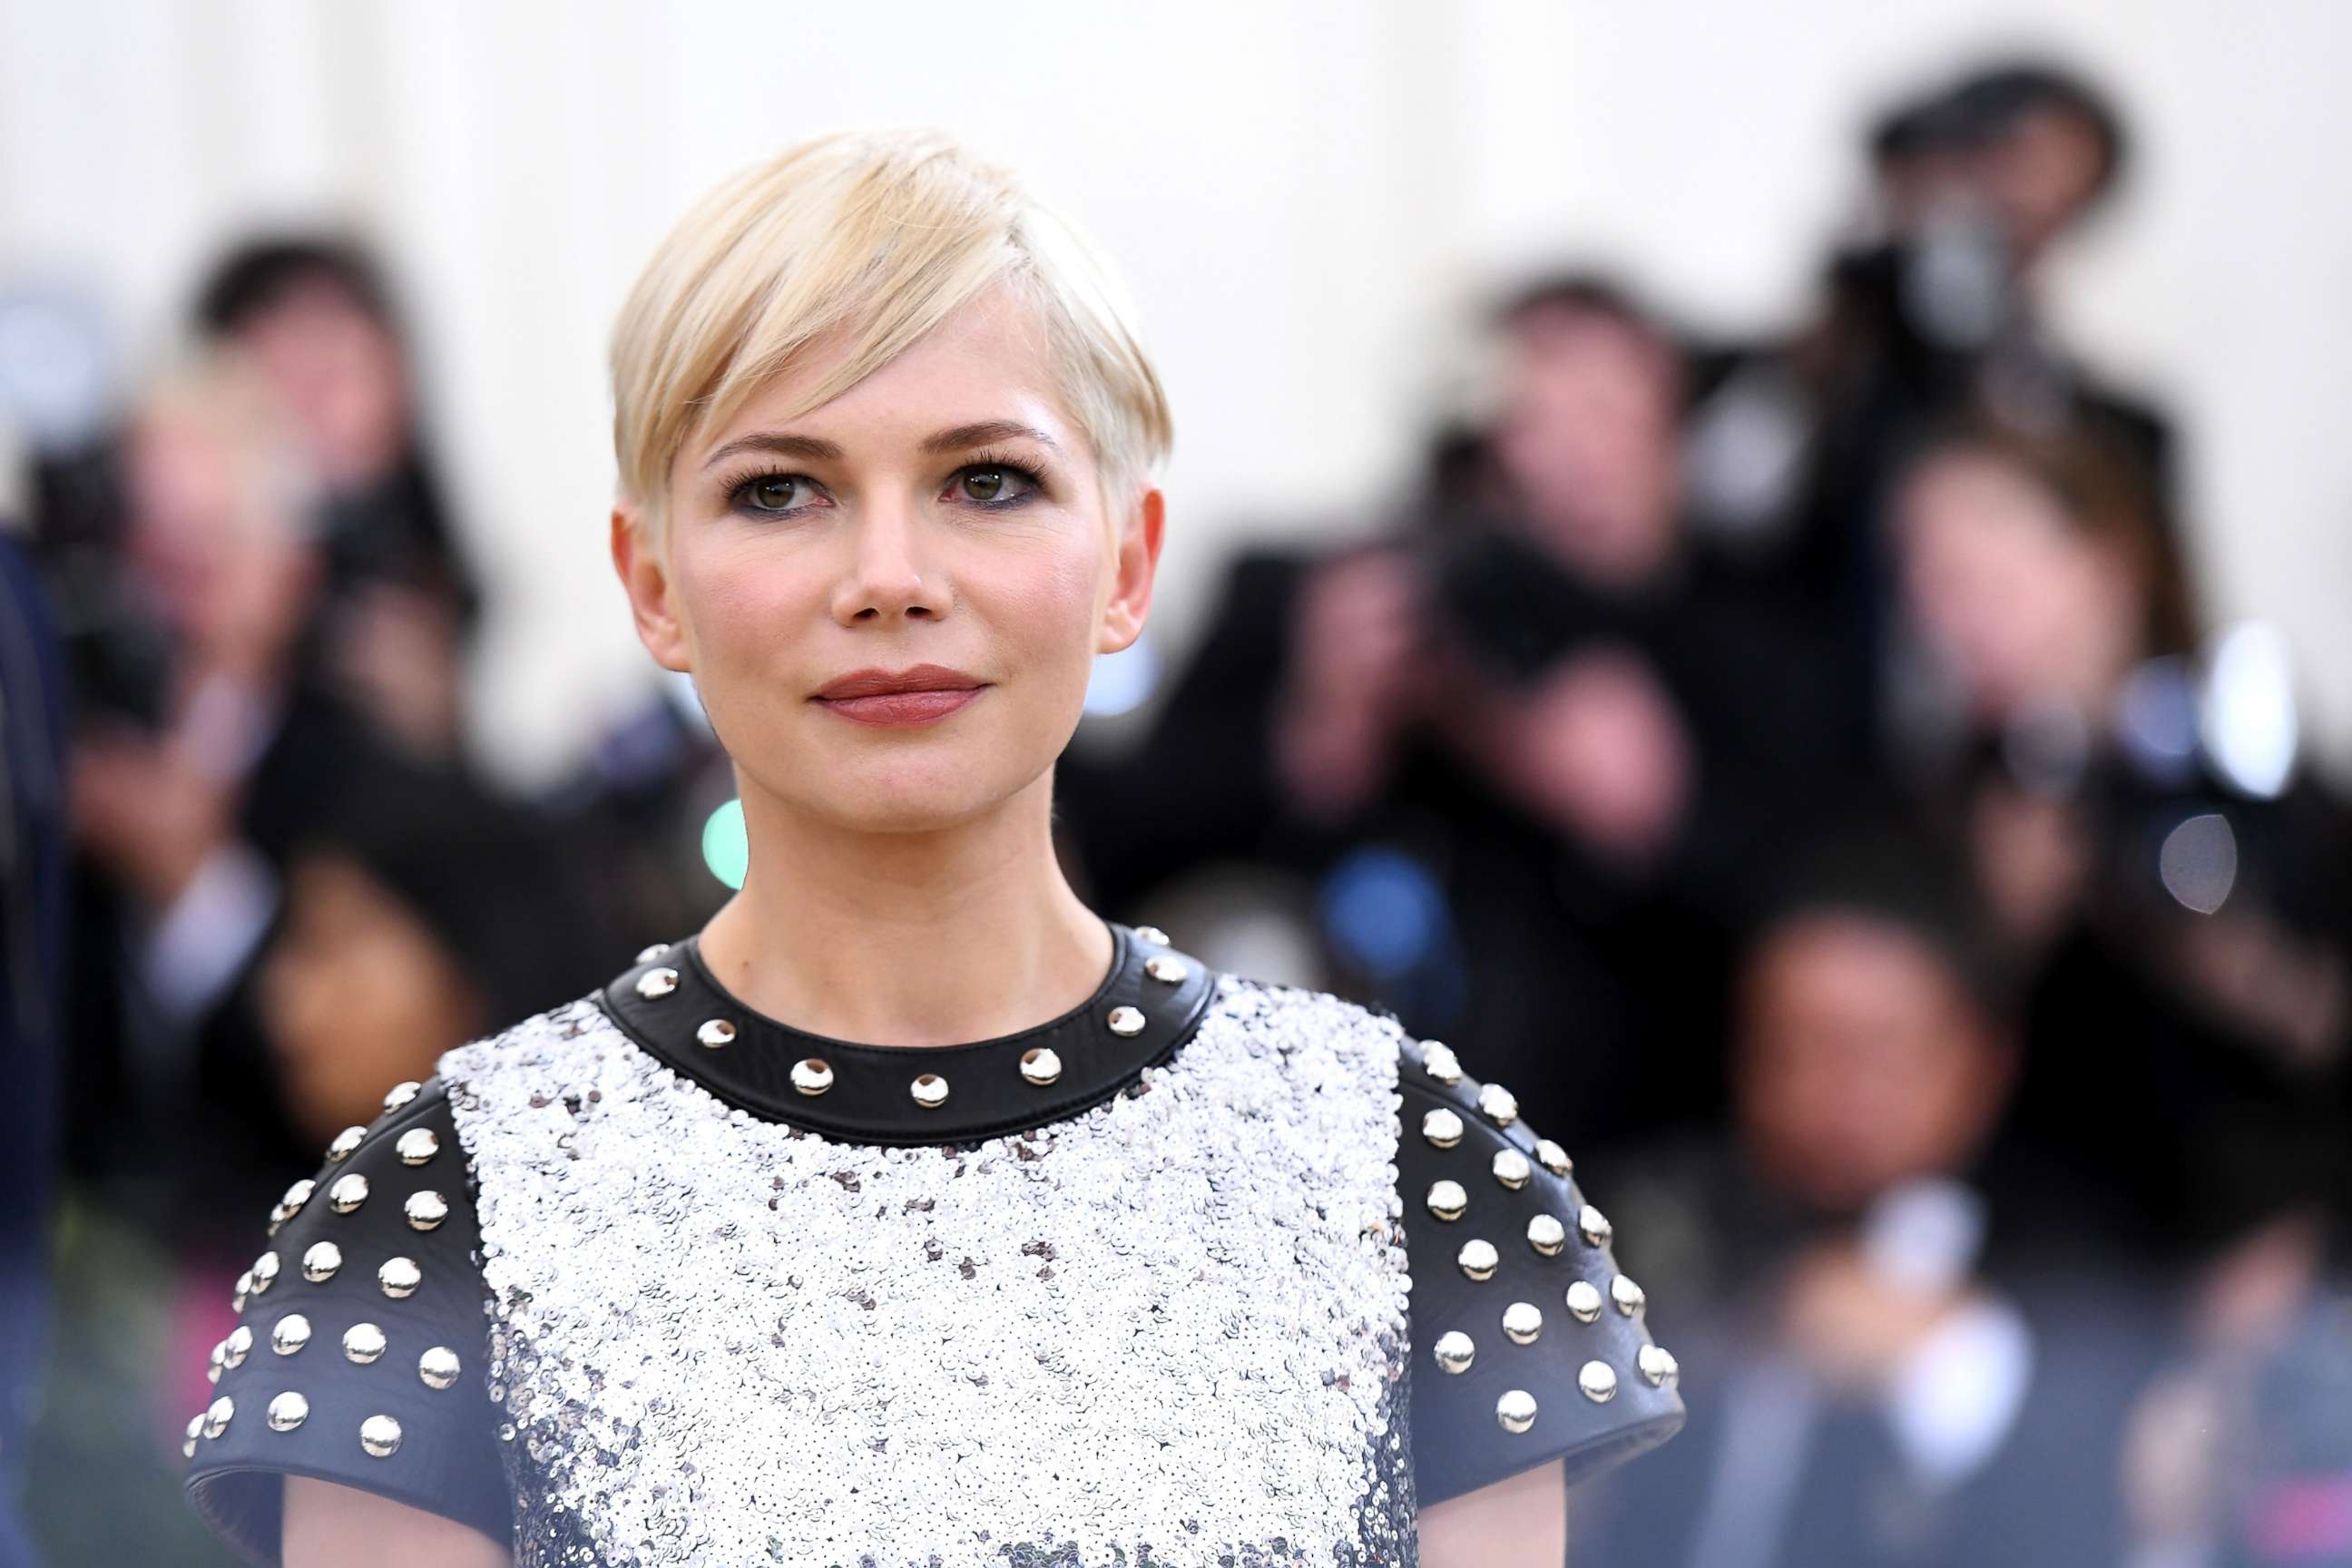 PHOTO: Actor Michelle Williams attends the Heavenly Bodies: Fashion & The Catholic Imagination Costume Institute Gala at The Metropolitan Museum of Art, May 7, 2018, in New York City.